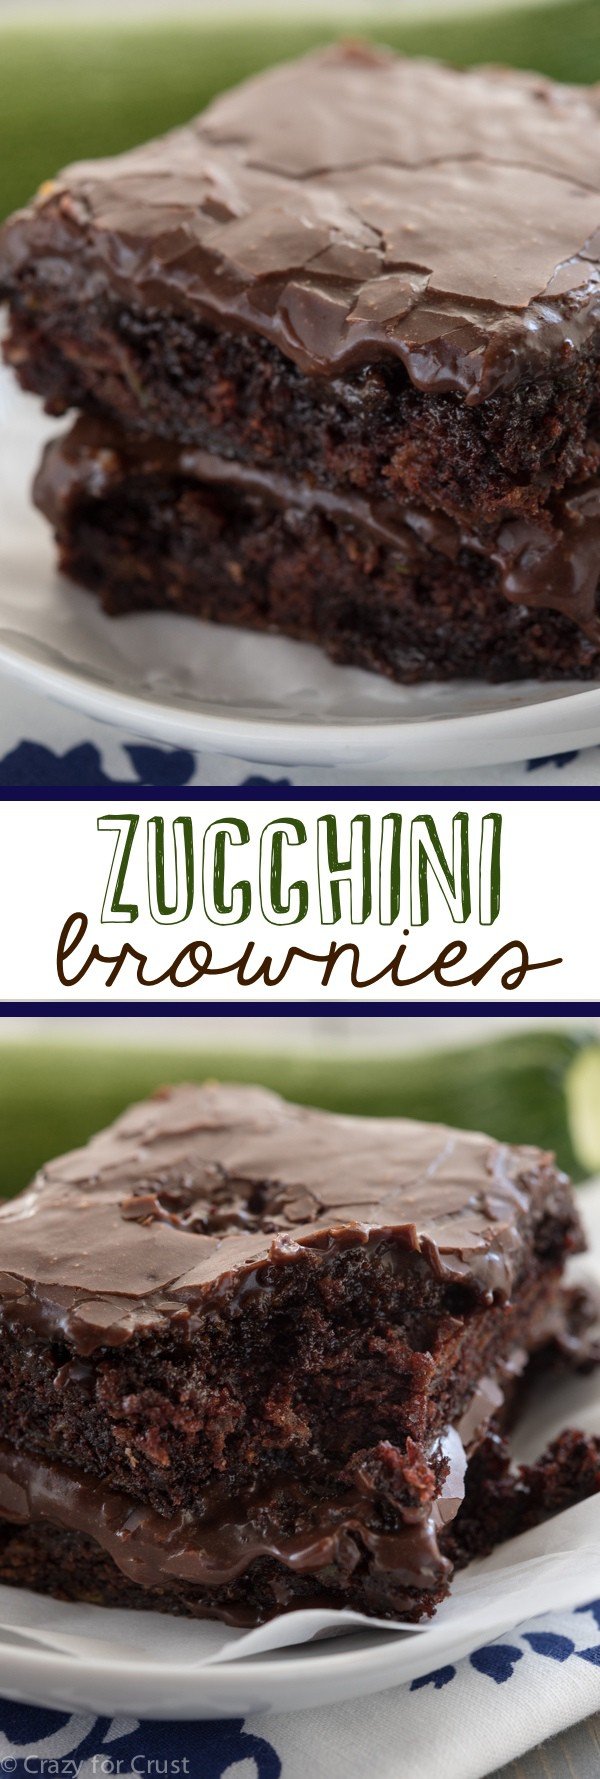 Zucchini Brownies - the easiest recipe for the most gooey, chocolaty, fudgy brownies full of zucchini! And NO ONE will guess!